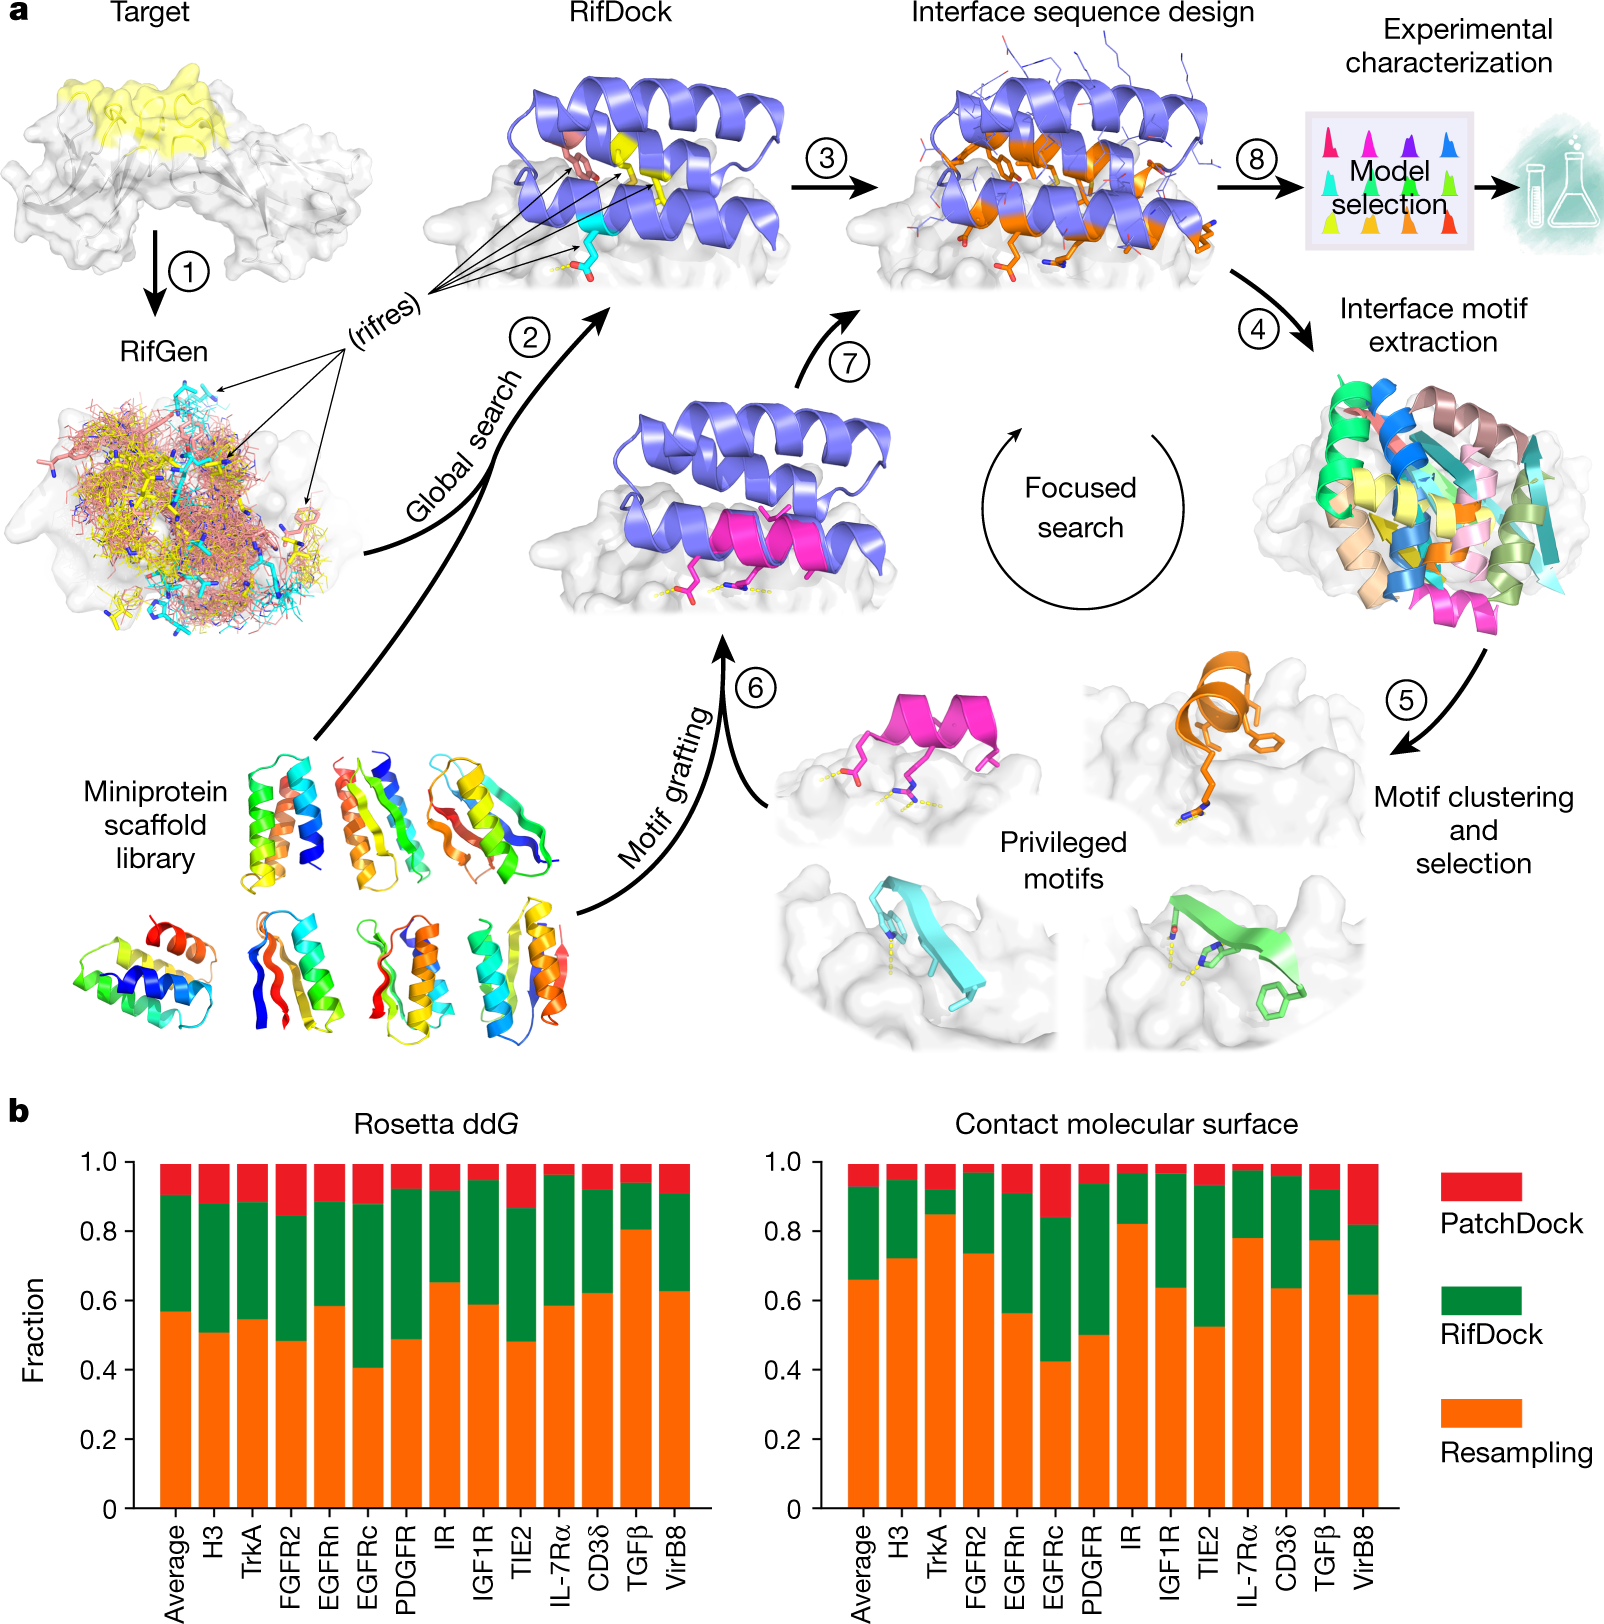 Running protein structure prediction at scale using a web interface for  researchers